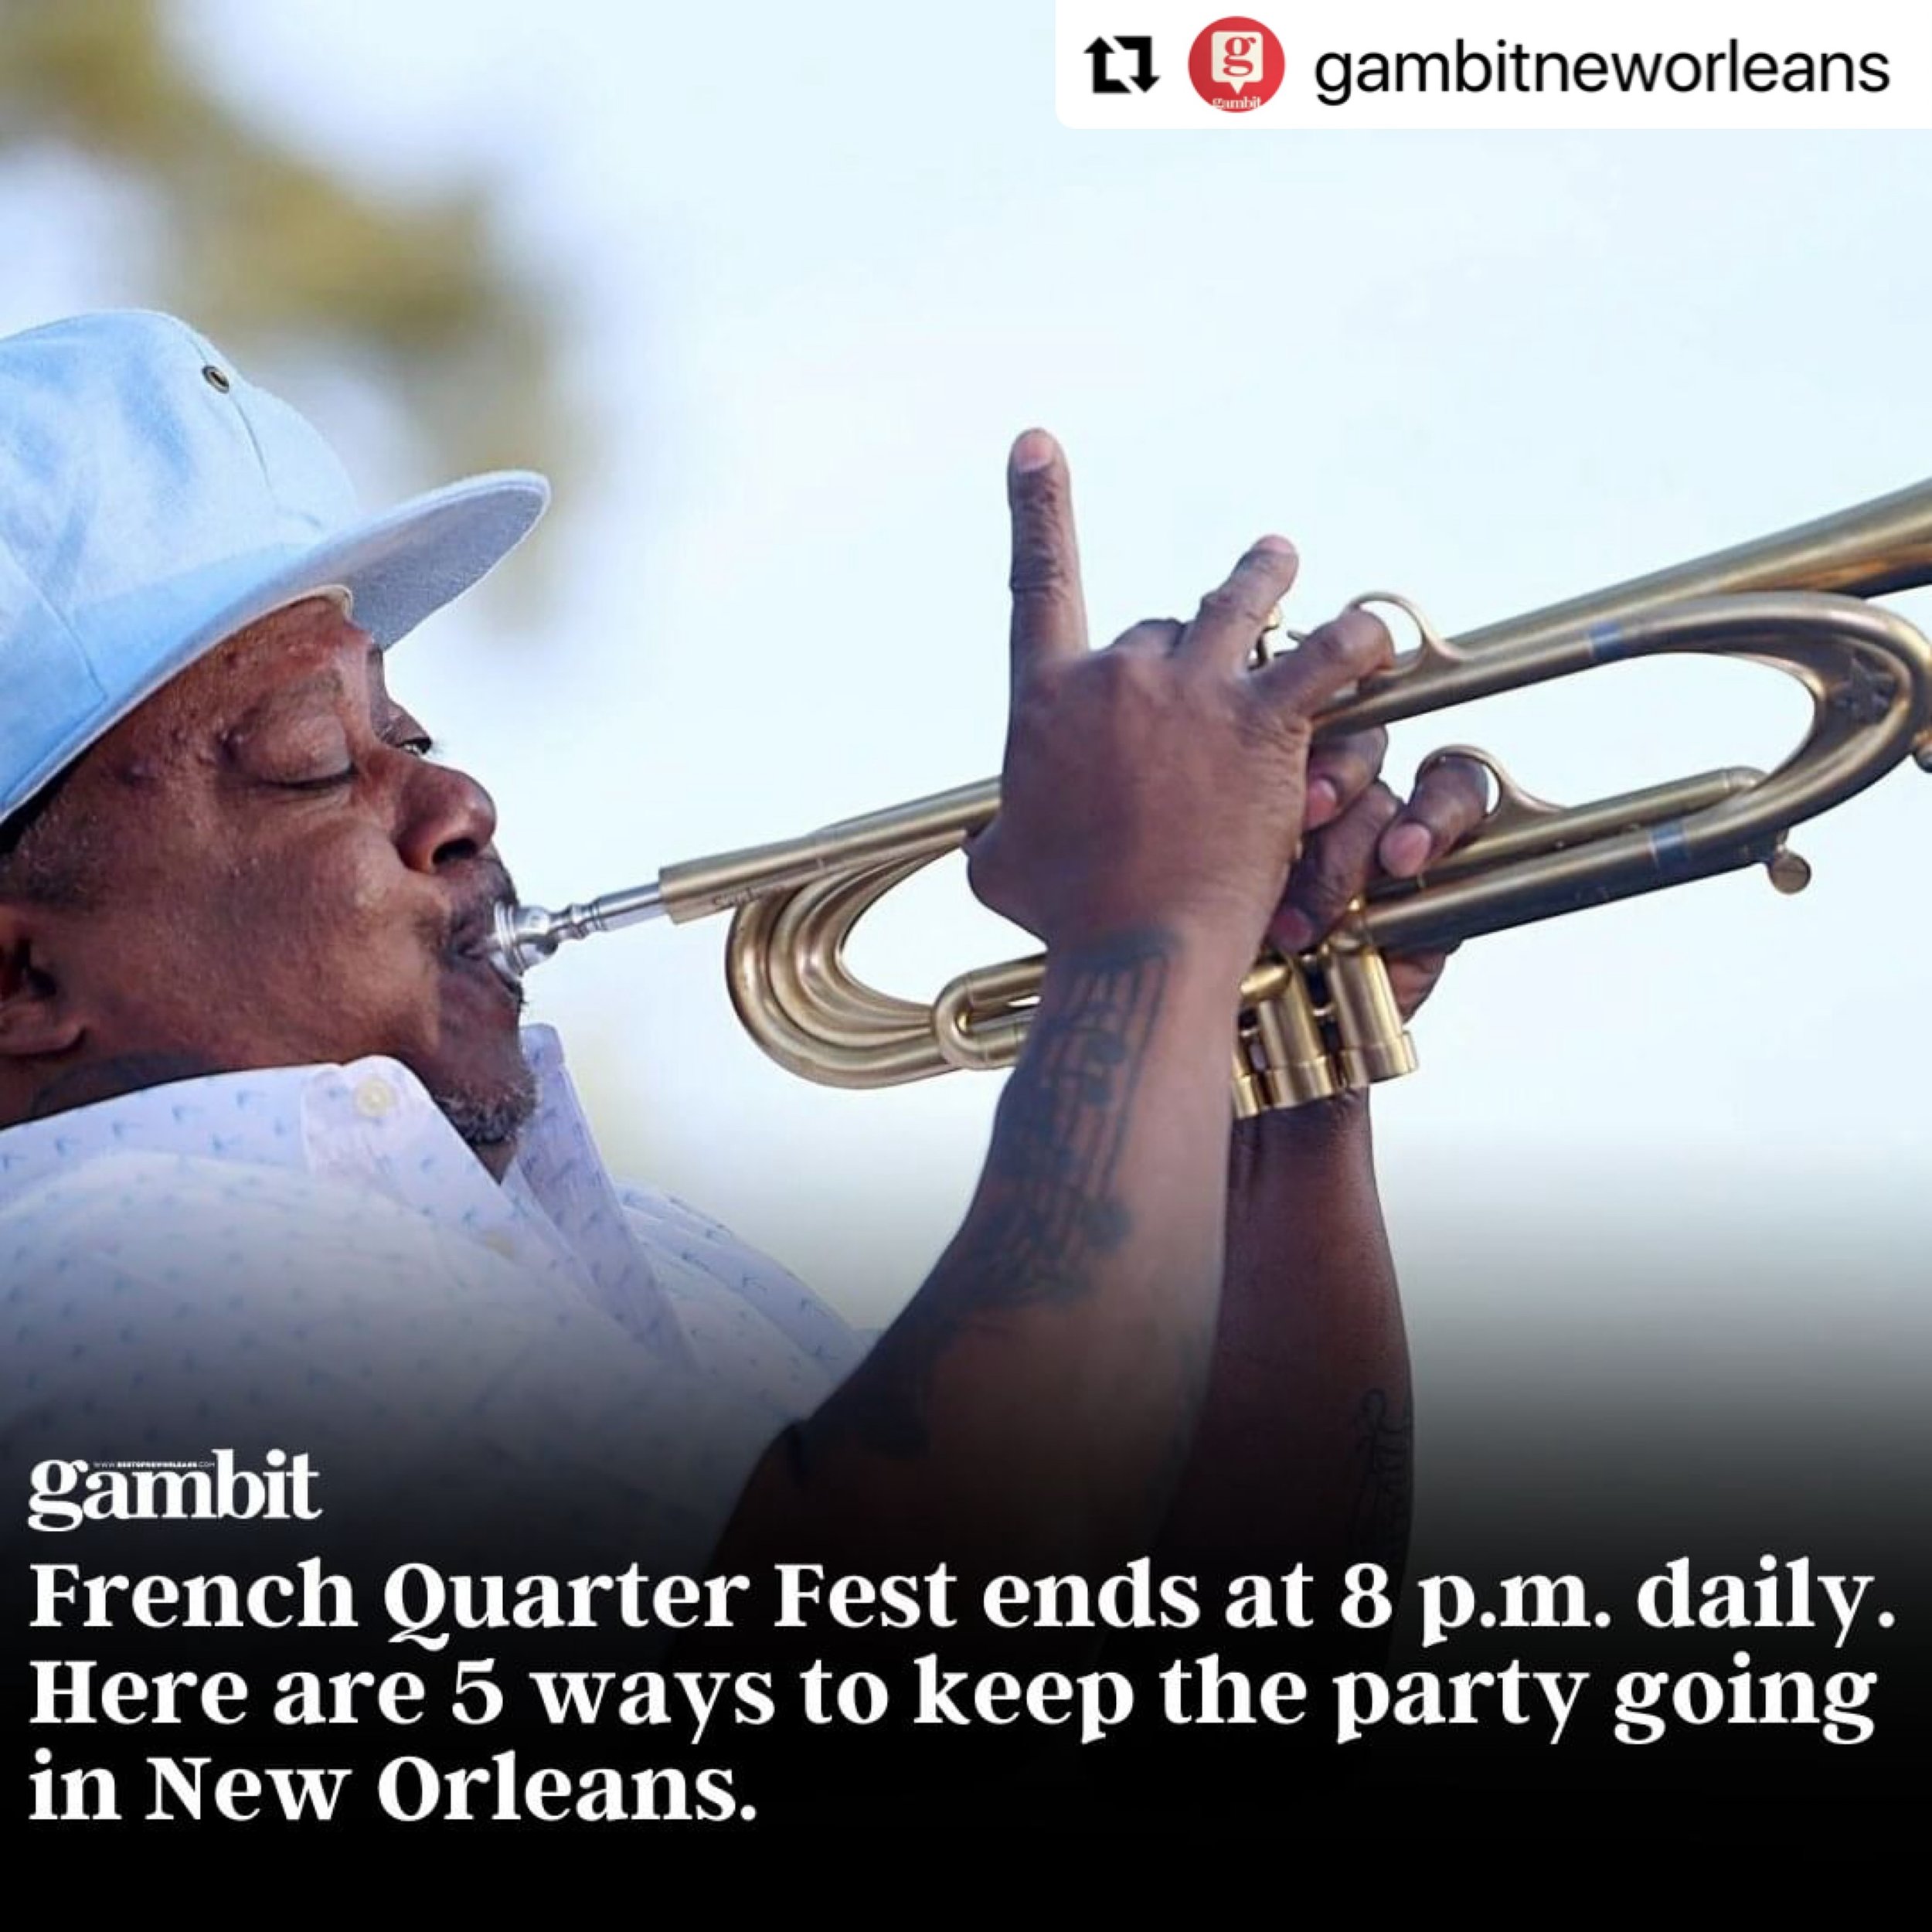 ALL ABOARD! Keep that FQF Party Going!
Kermit Ruffins &amp; the Barbecue Swingers hold down a late set at Blue Nile Friday at 11 p.m.

#Repost @gambitneworleans with @use.repost
・・・
🎶🌙 Keep the party going after French Quarter Fest wraps up! From l